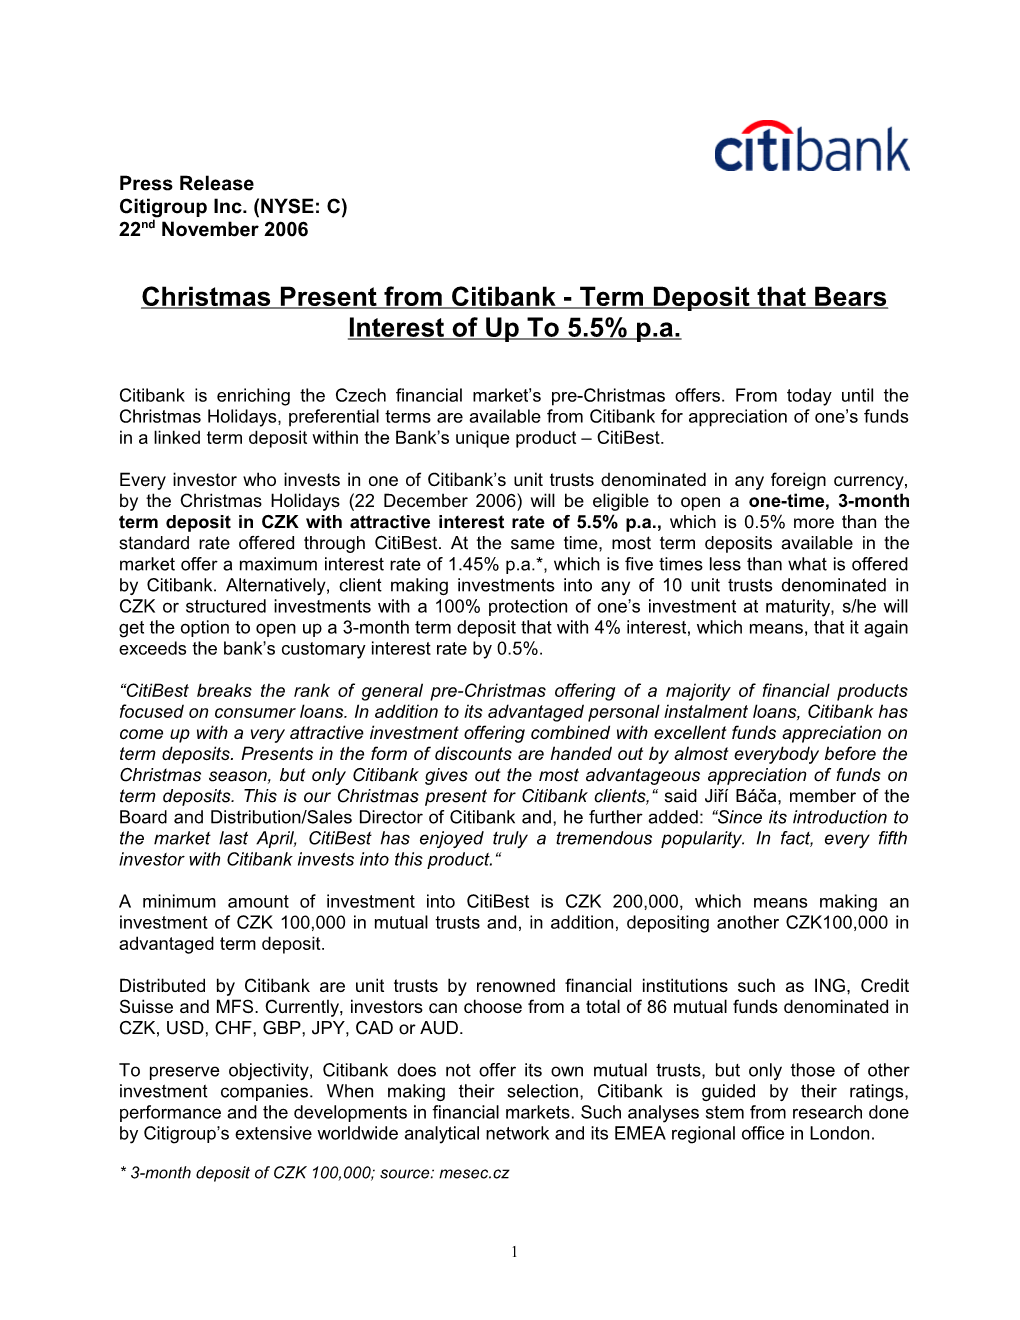 Christmas Present from Citibank - Term Deposit That Bears Interest of up to 5.5% P.A